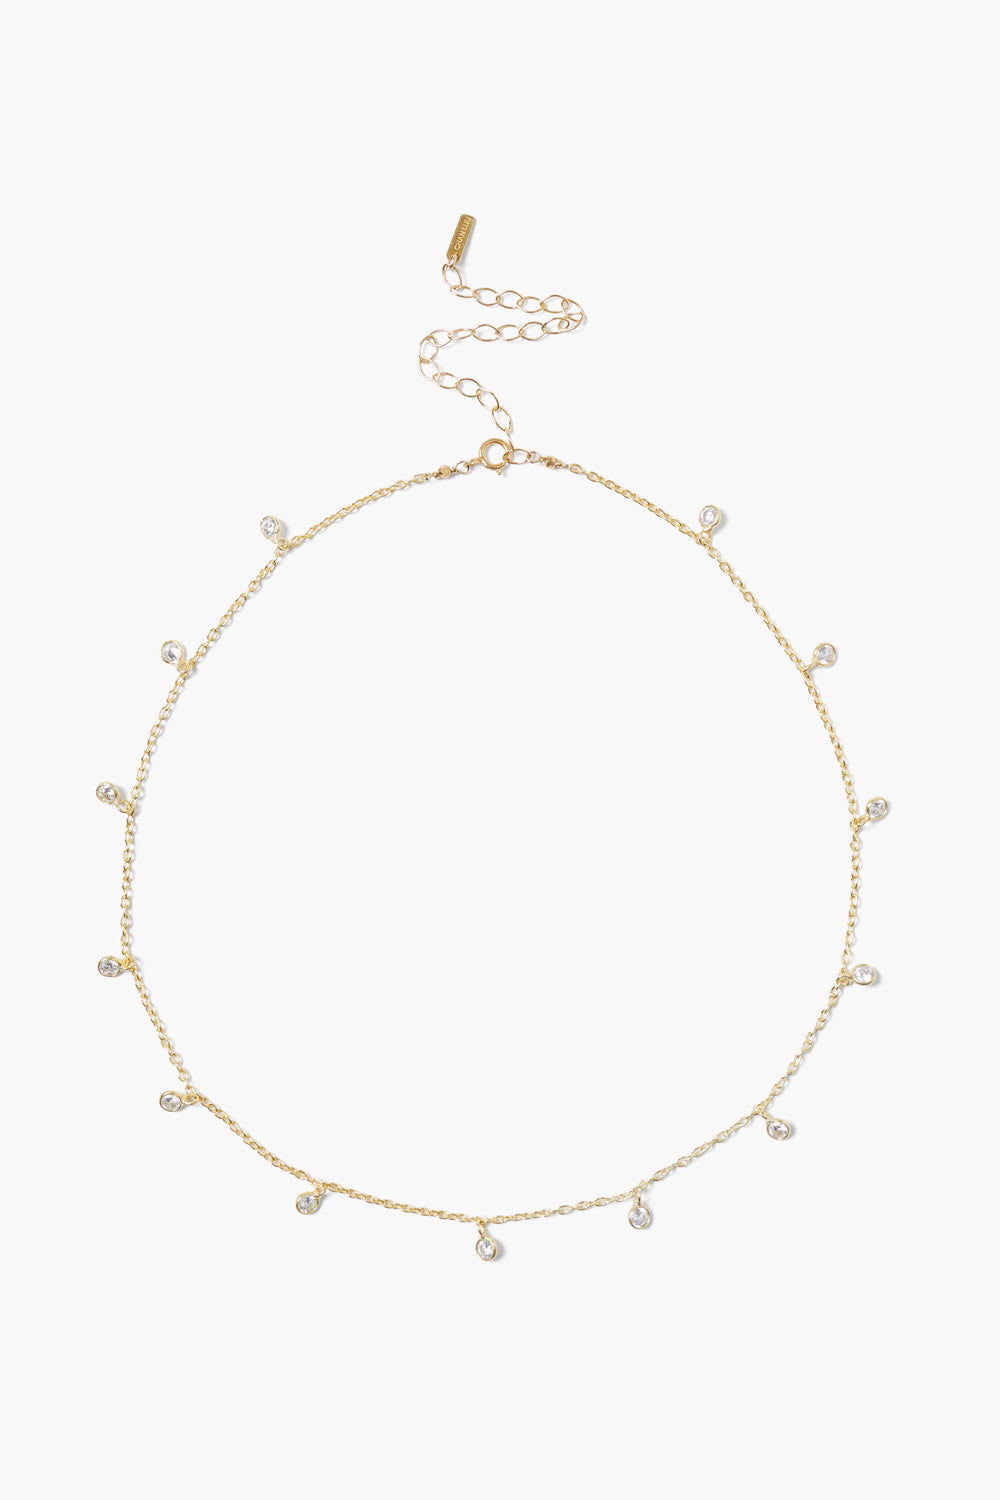 YELLOW GOLD CRYSTAL NECKLACE - Kingfisher Road - Online Boutique